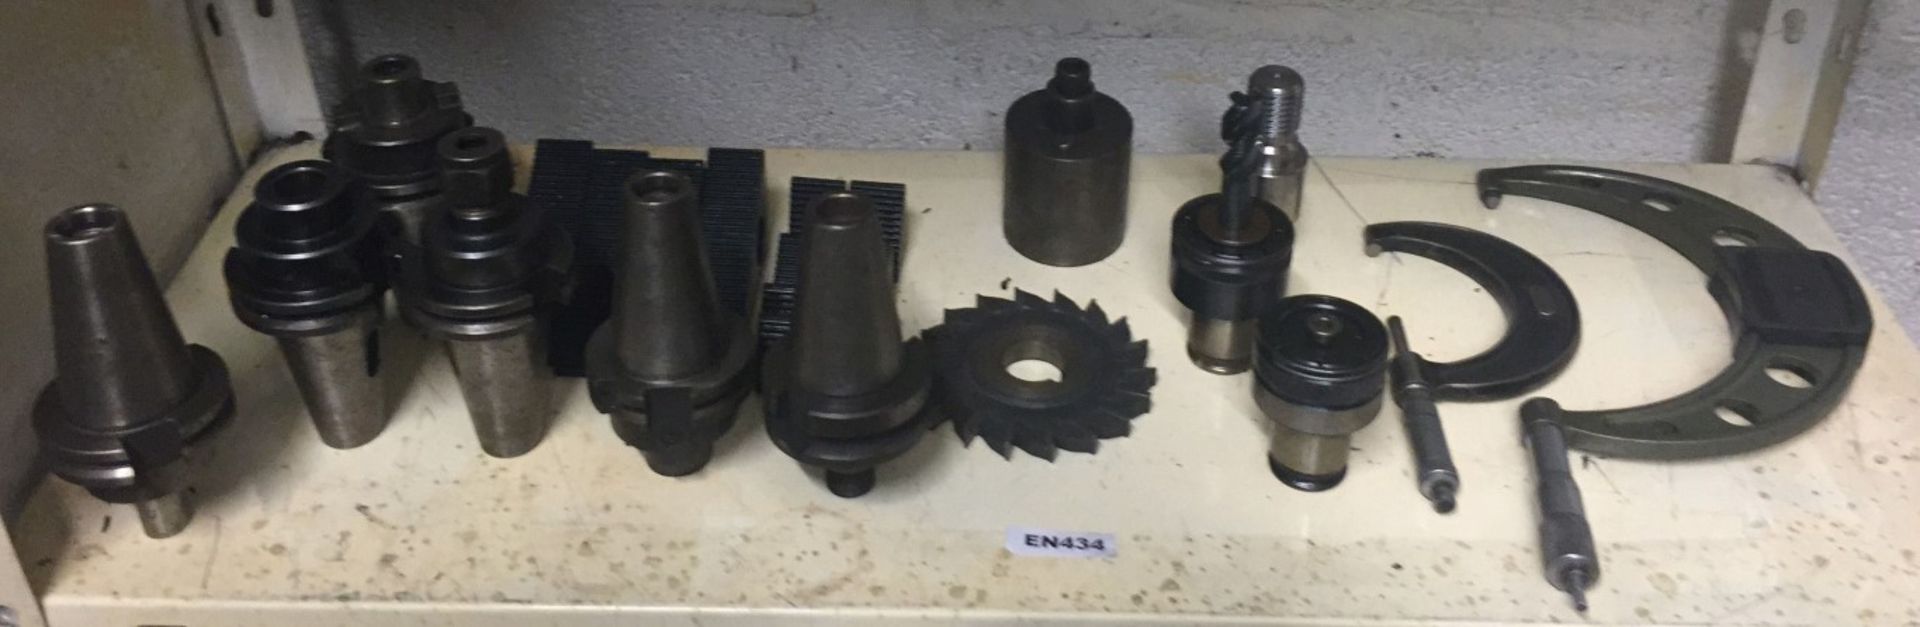 1 x Shelf Lot comprising of approximate 6 x assorted CNC/VMC Mill Chucks, 2 Calipers, 12 clamp steps - Image 20 of 21